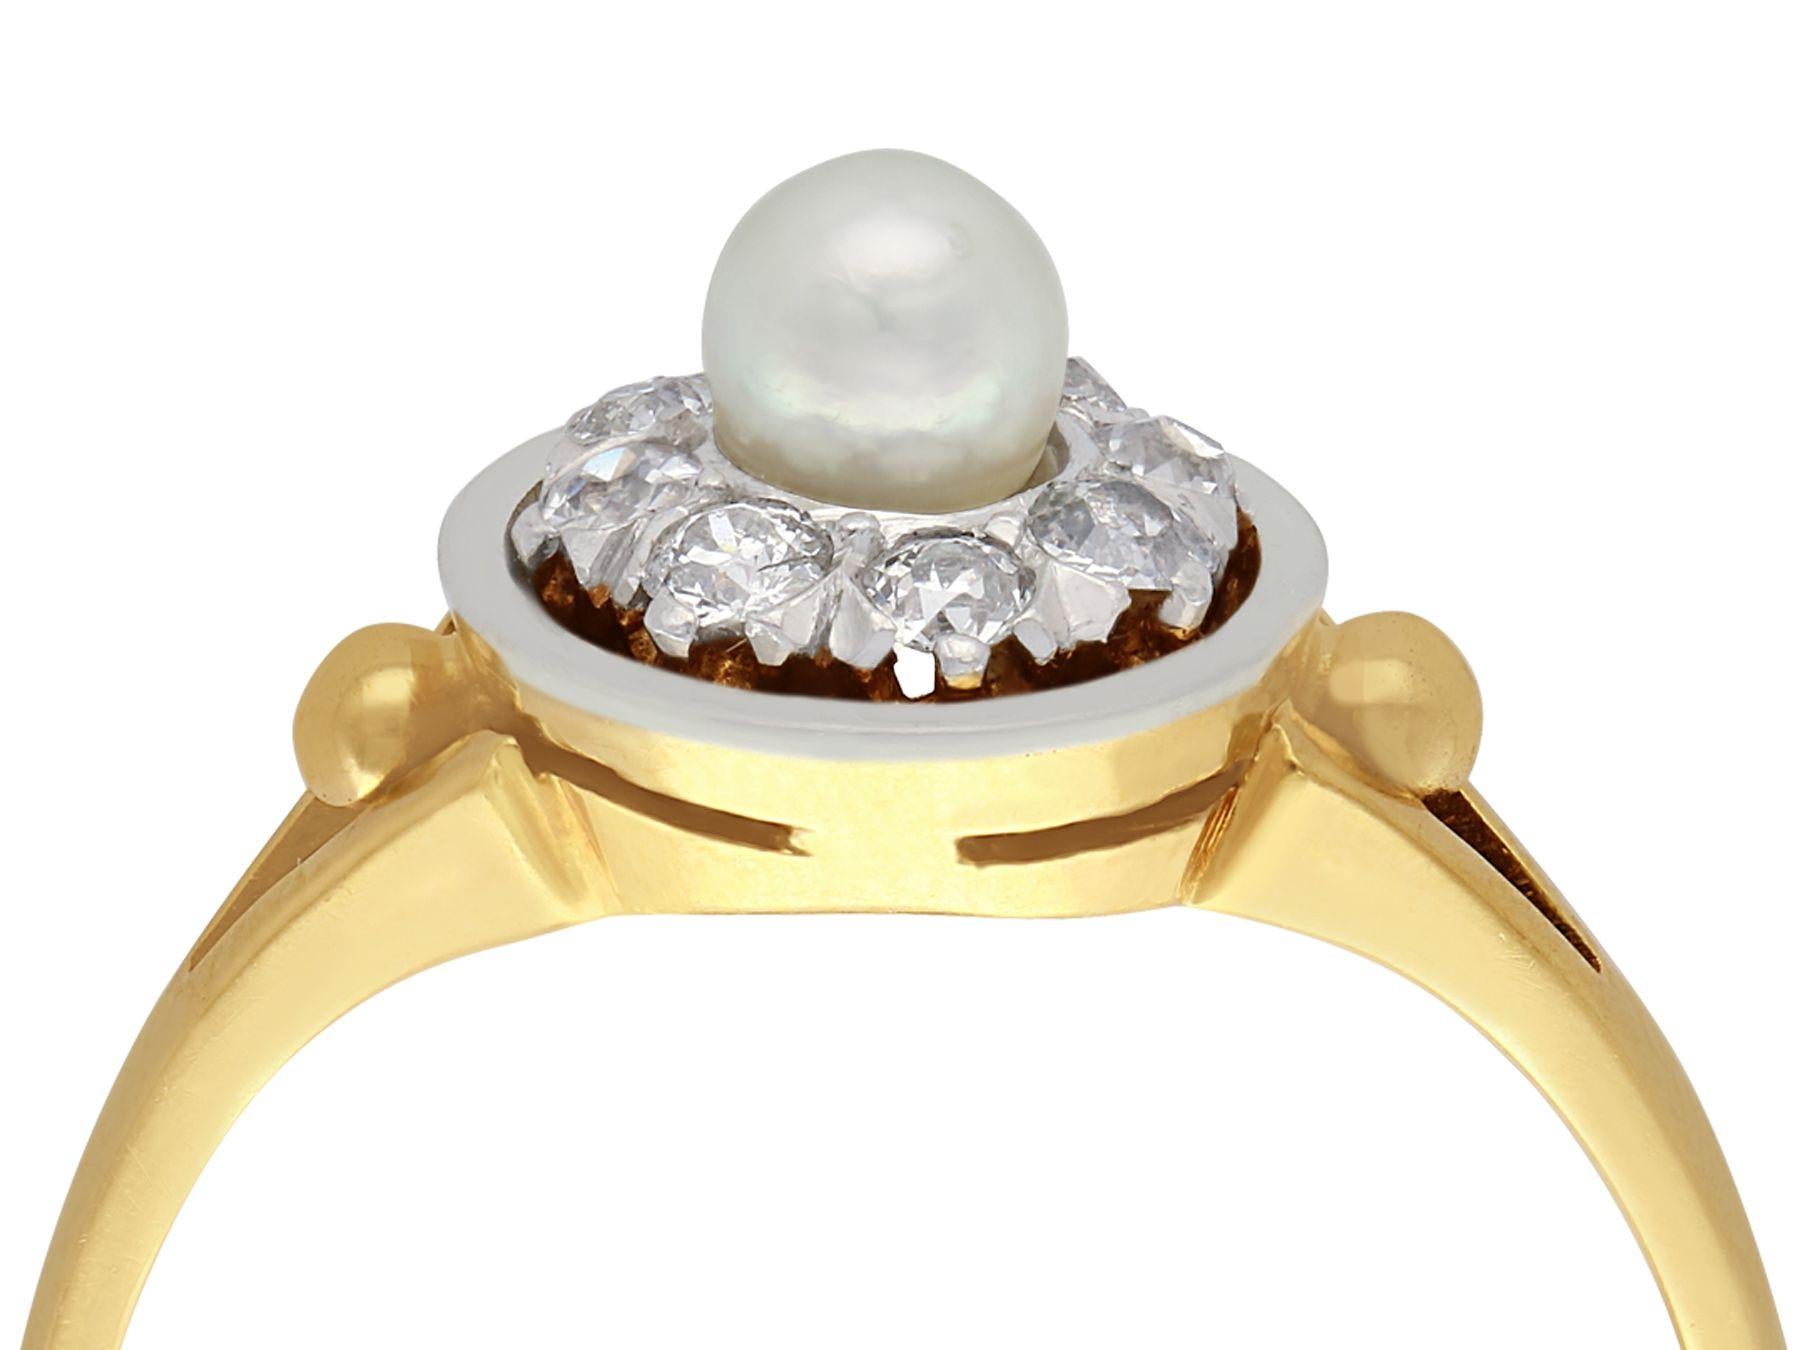 A fine and impressive antique pearl and 0.36 carat diamond, 18 karat yellow gold and 18 karat white gold set dress ring; part of our antique jewelry and estate jewelry collections.

This fine and impressive antique diamond and pearl ring has been